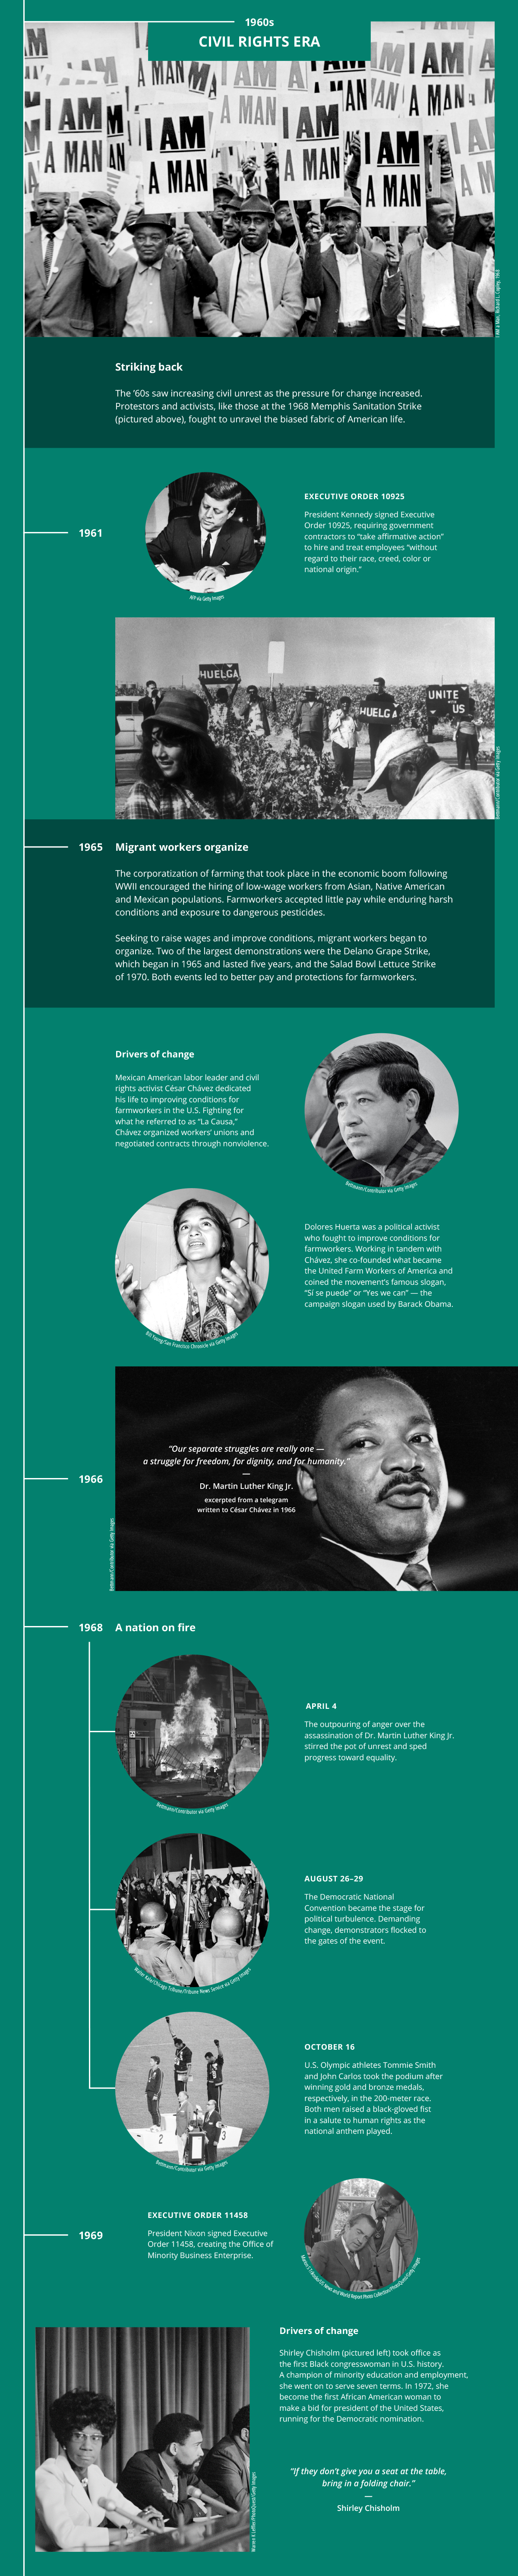 The century-long journey to supplier diversity - page 2